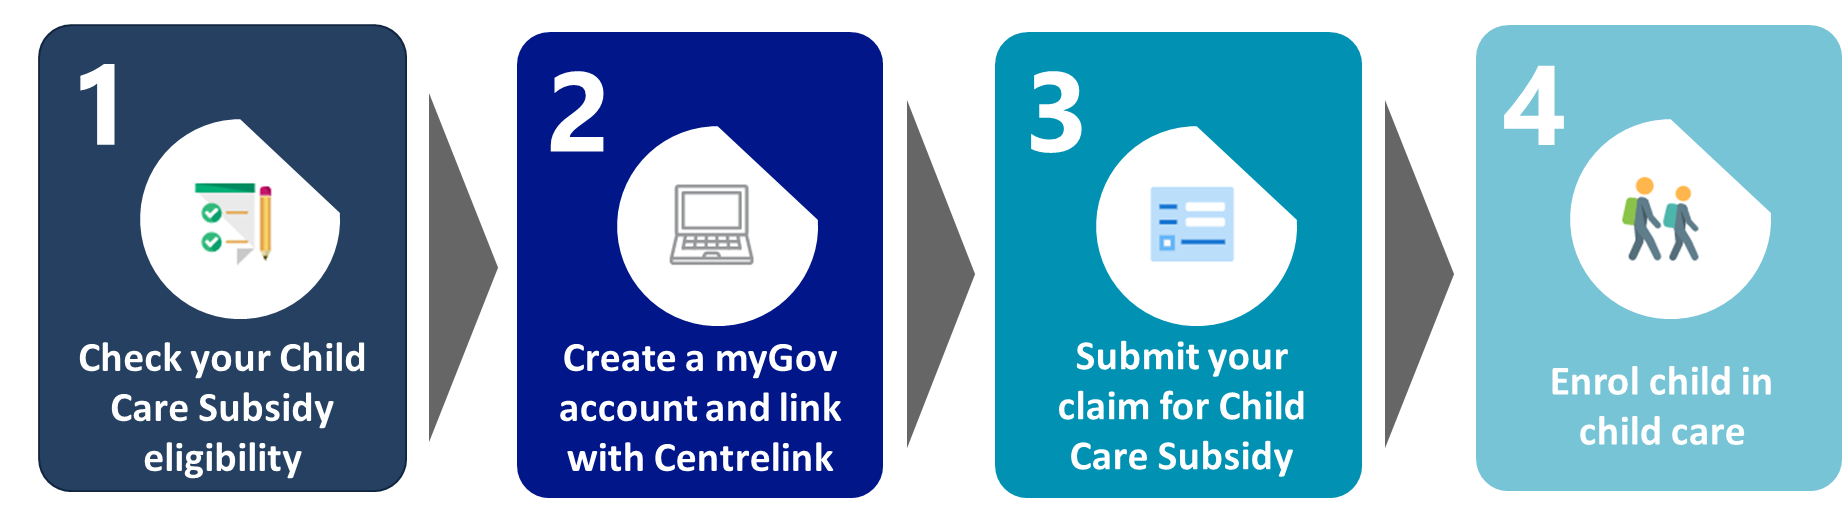 1. Check your eligibility. 2. Create a mygov account and link with centrelink. 3. Submit your claim for child care subsidy. 4. Enrol child in child care.